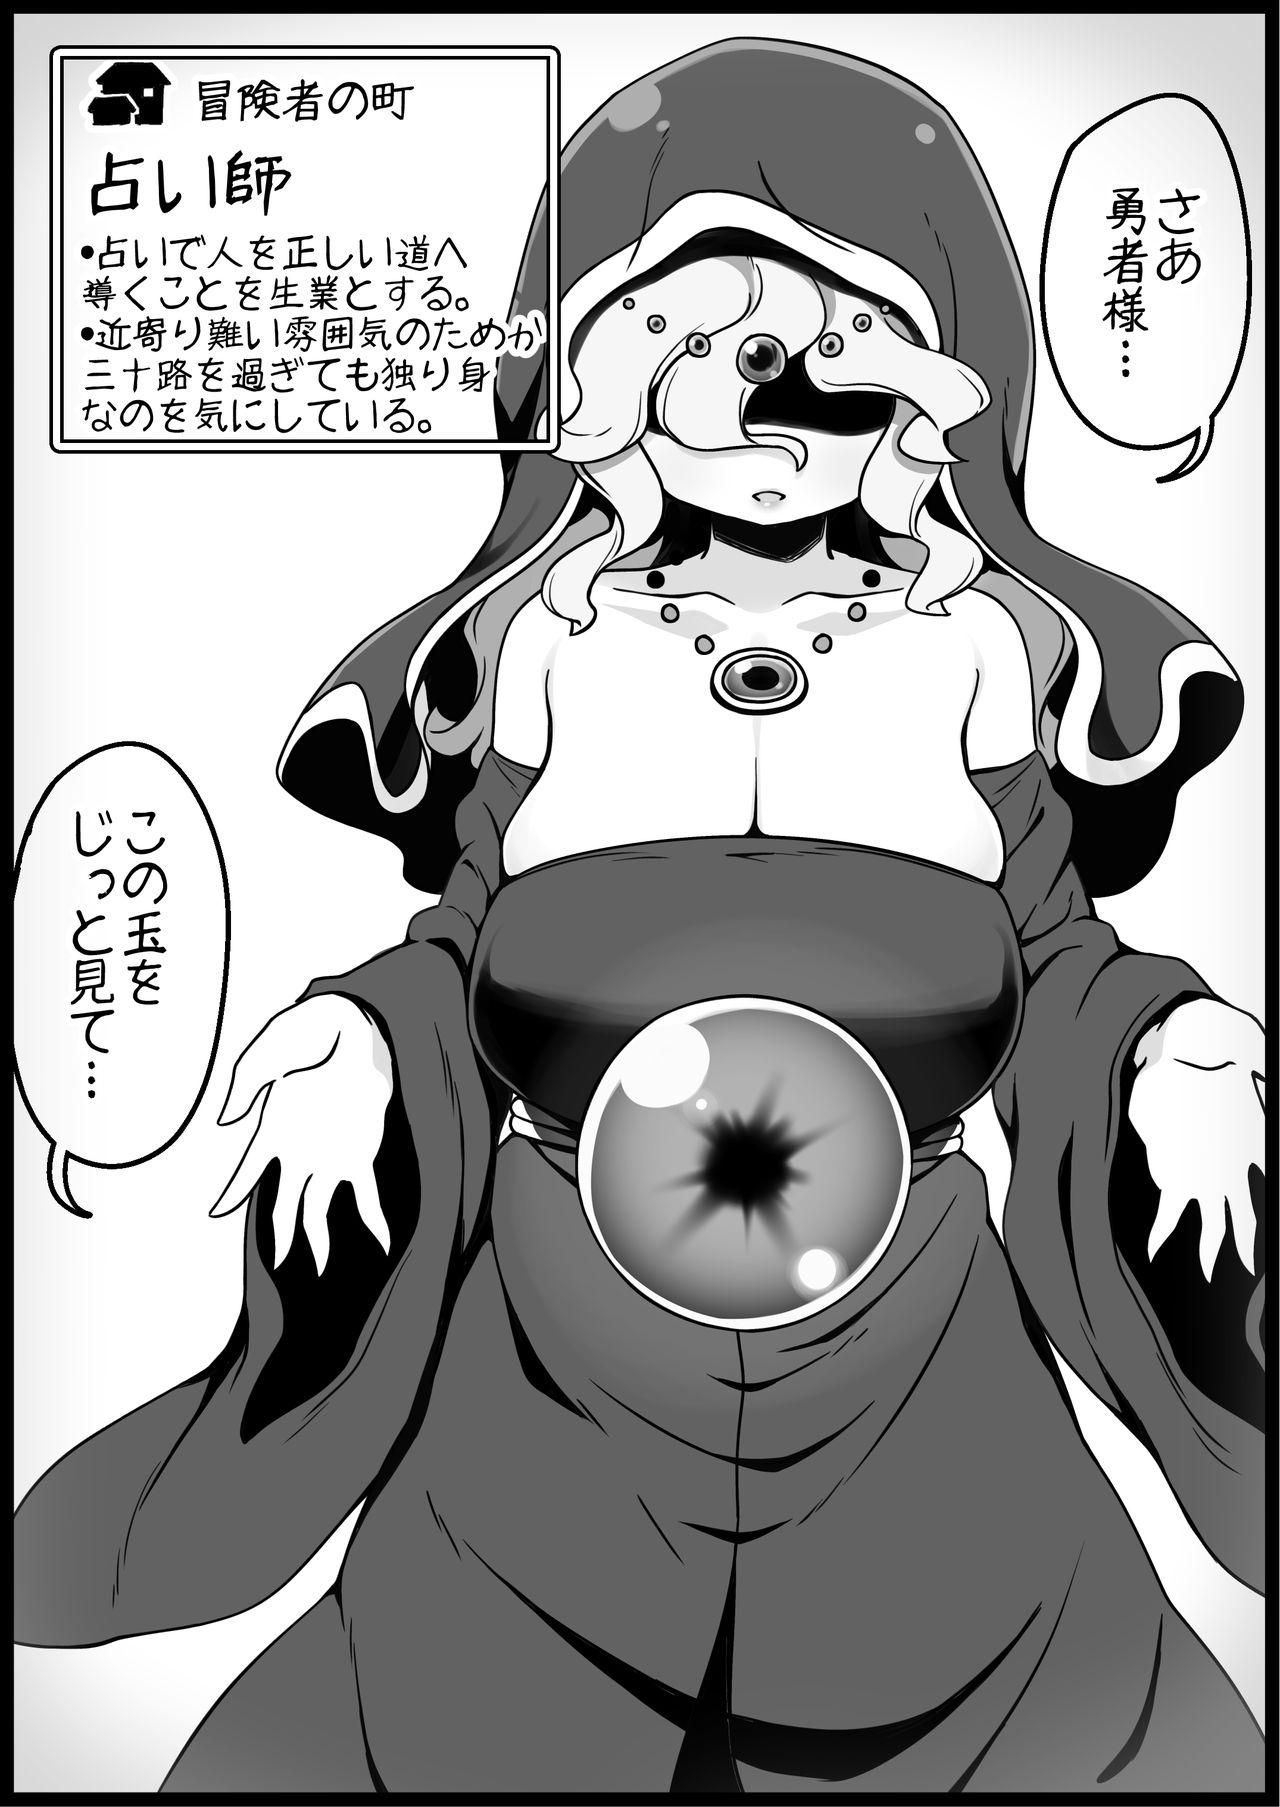 Petite Porn [Succubus Egg] Fantasy World 2 Too Forgiving to Heroes-Continued NPC (mob) Opponent-Centered Short H Manga Collection- - Original Lesbians - Page 6